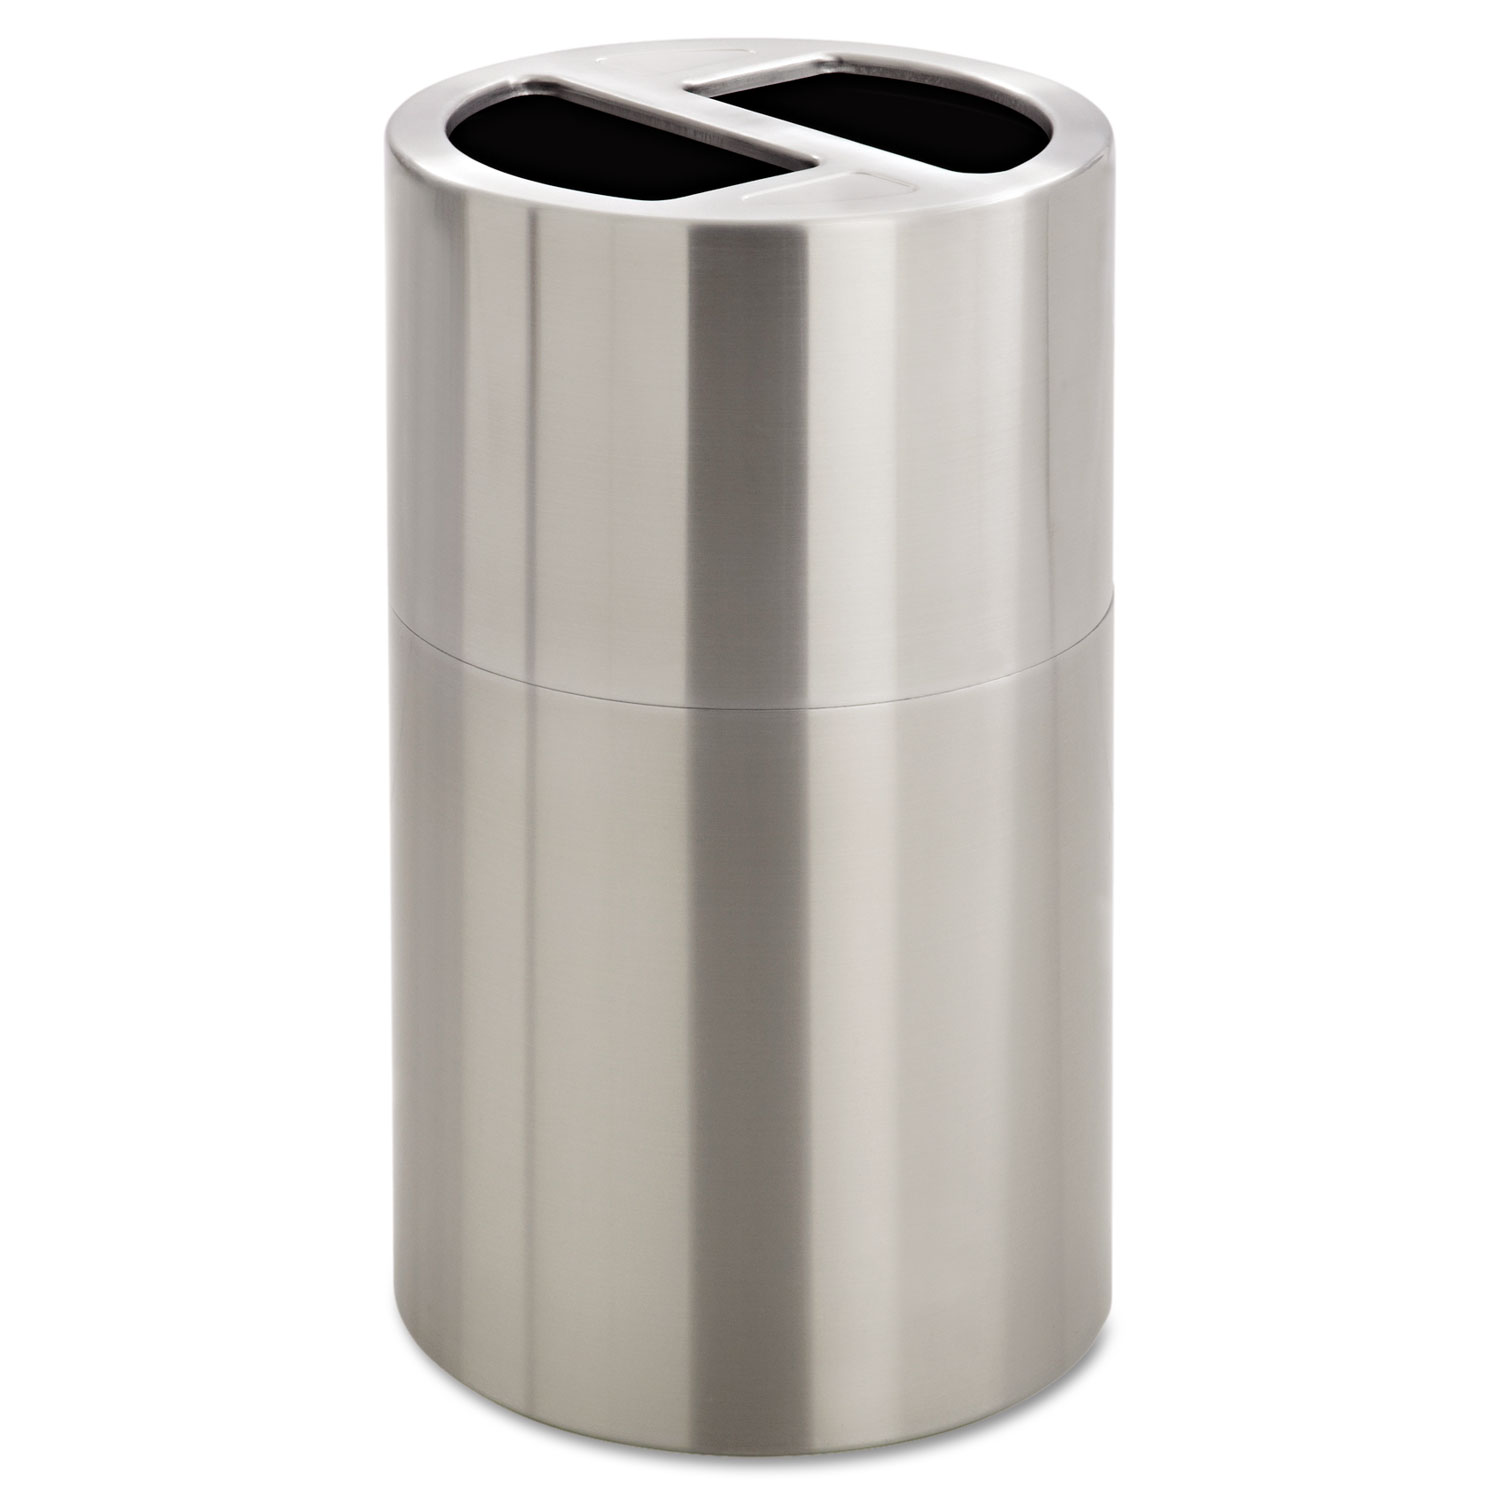  Safco 9931SS Dual Recycling Receptacle, 30 gal, Stainless Steel (SAF9931SS) 